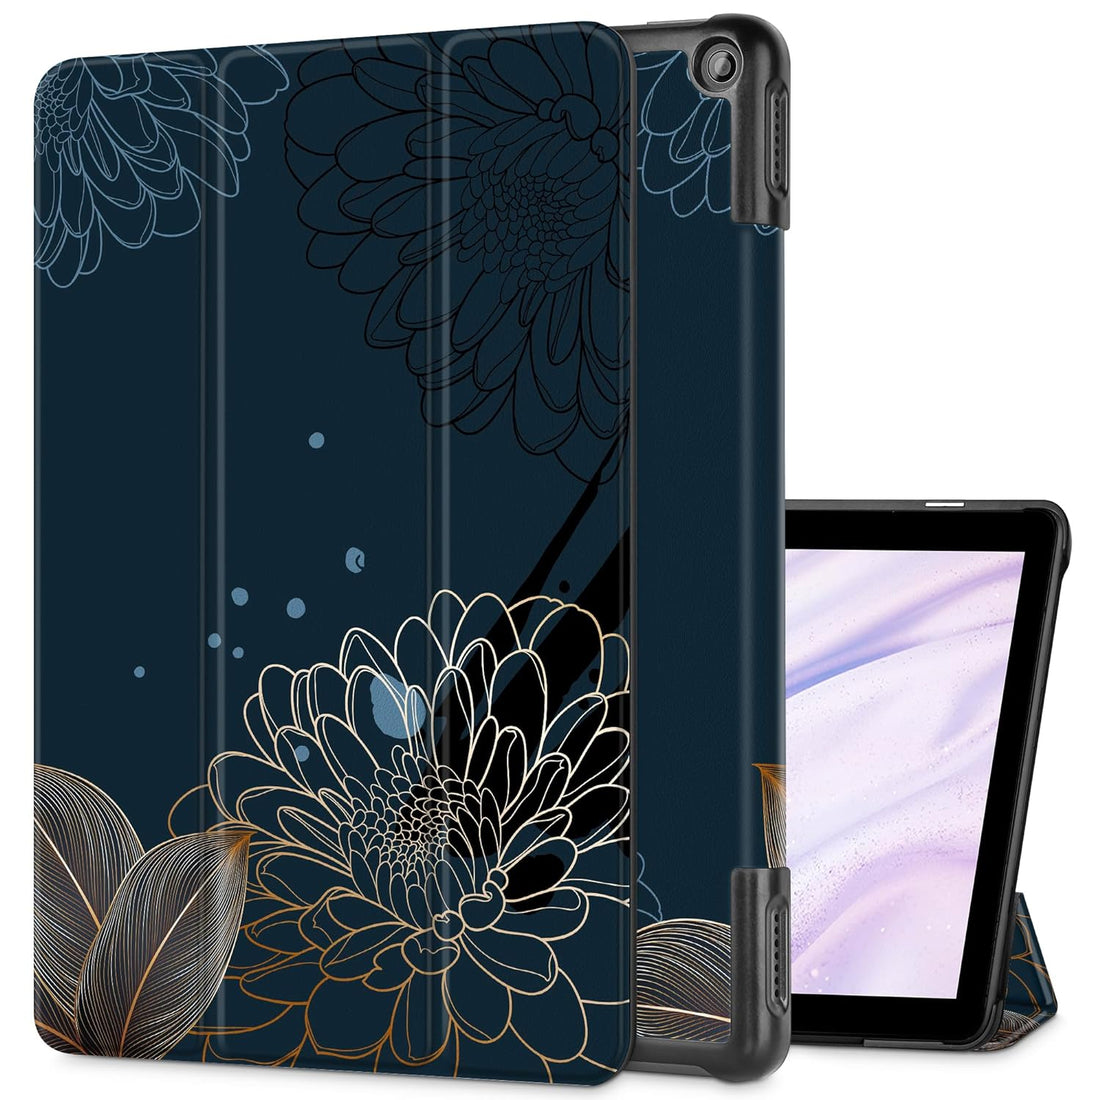 Mektron Case for All-New Amazon Fire HD 10 Tablet 2023 Release, Slim Fit Standing Cover with Auto Sleep/Wake,Line Chrysanthemums